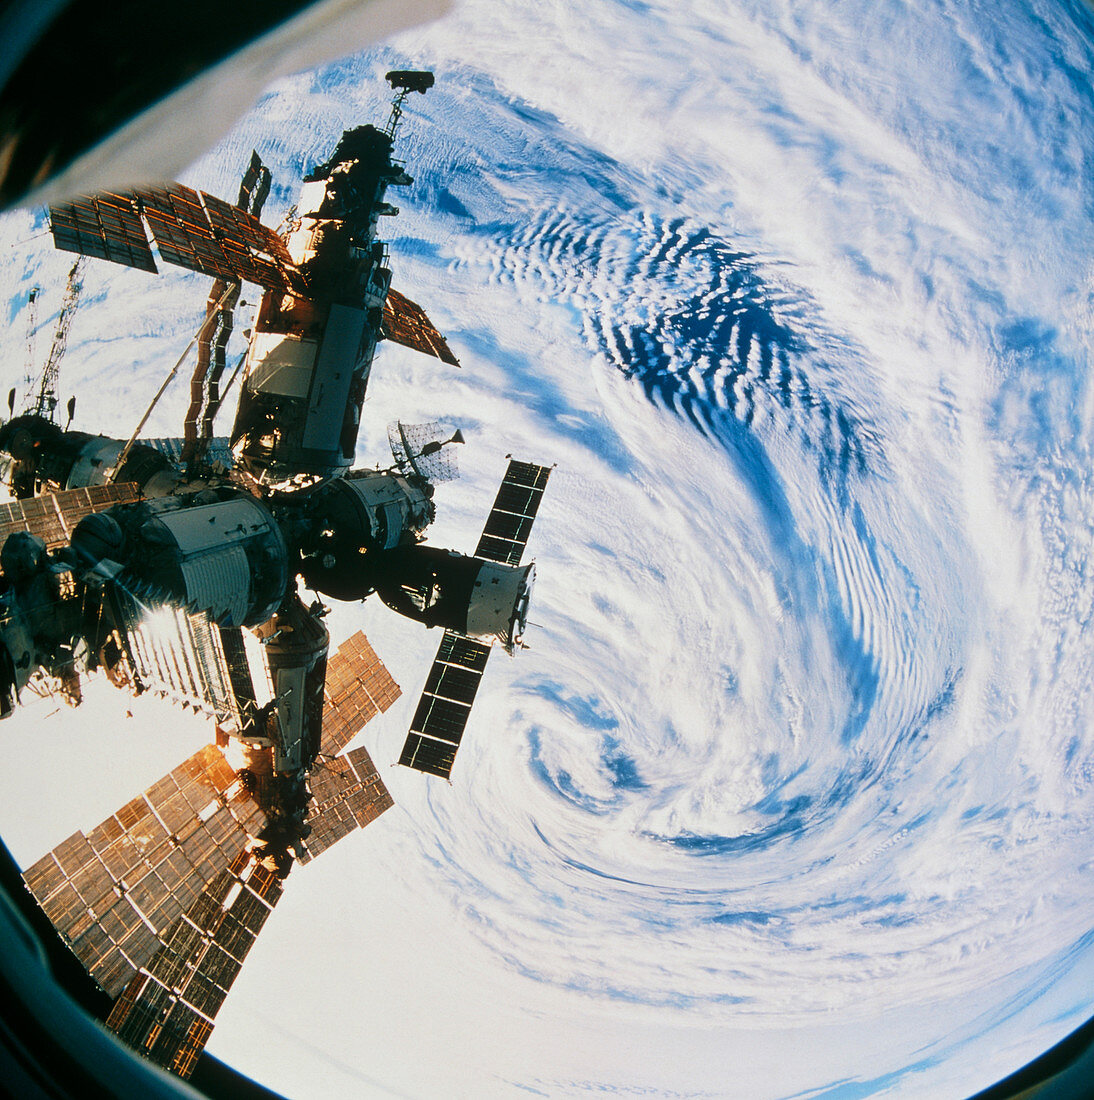 Russian space station Mir over a storm on Earth